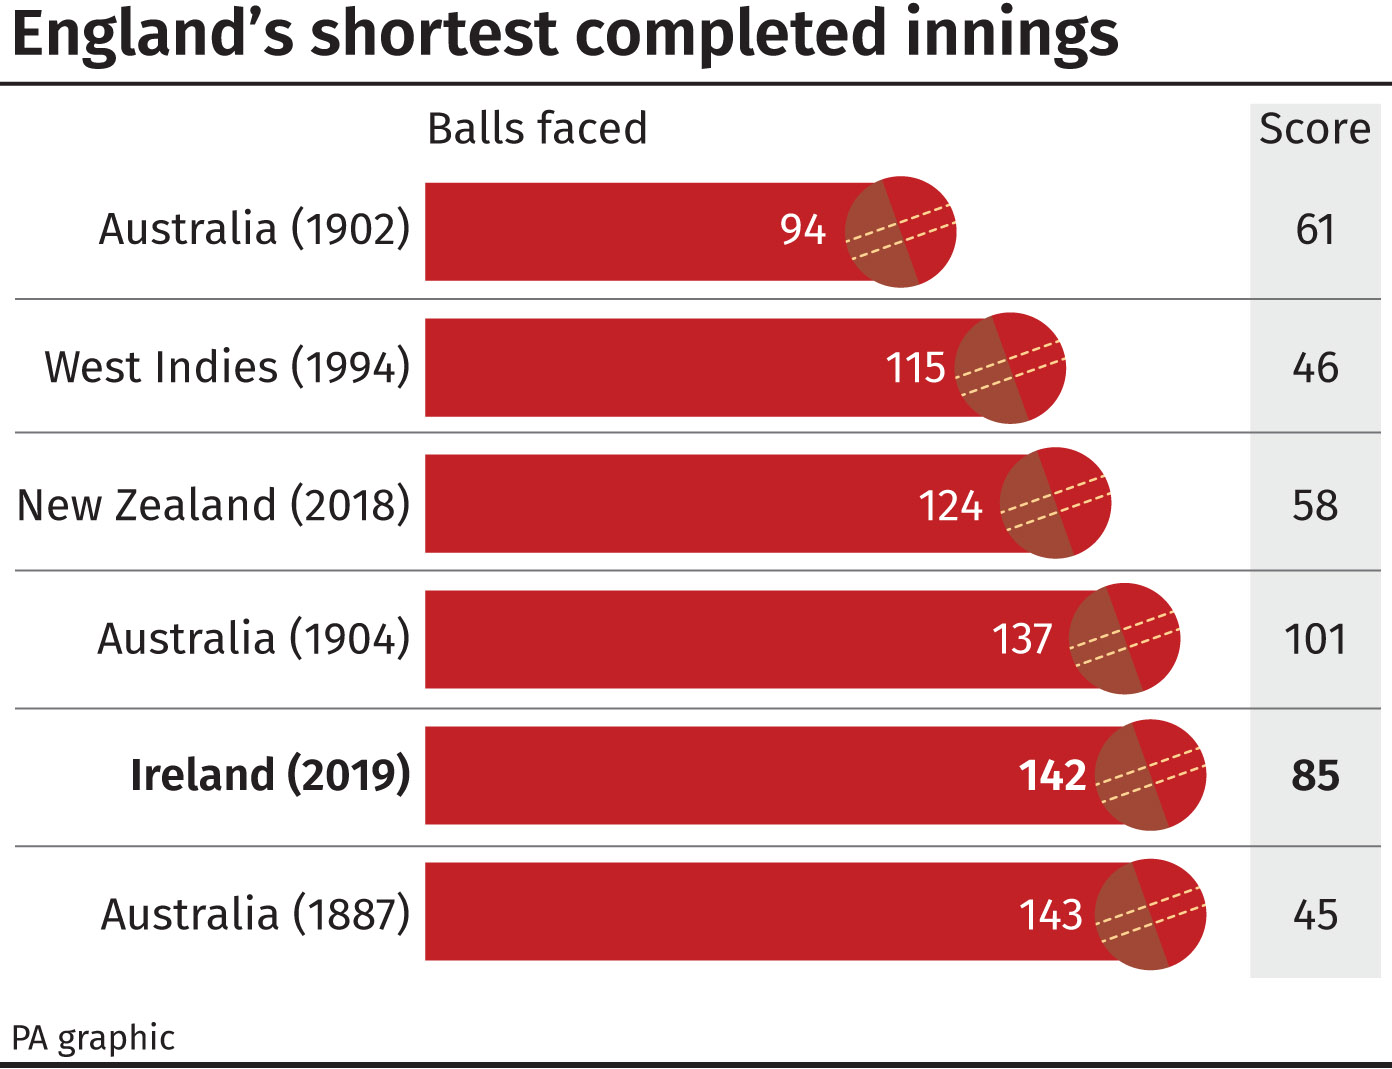 England's shortest completed innings